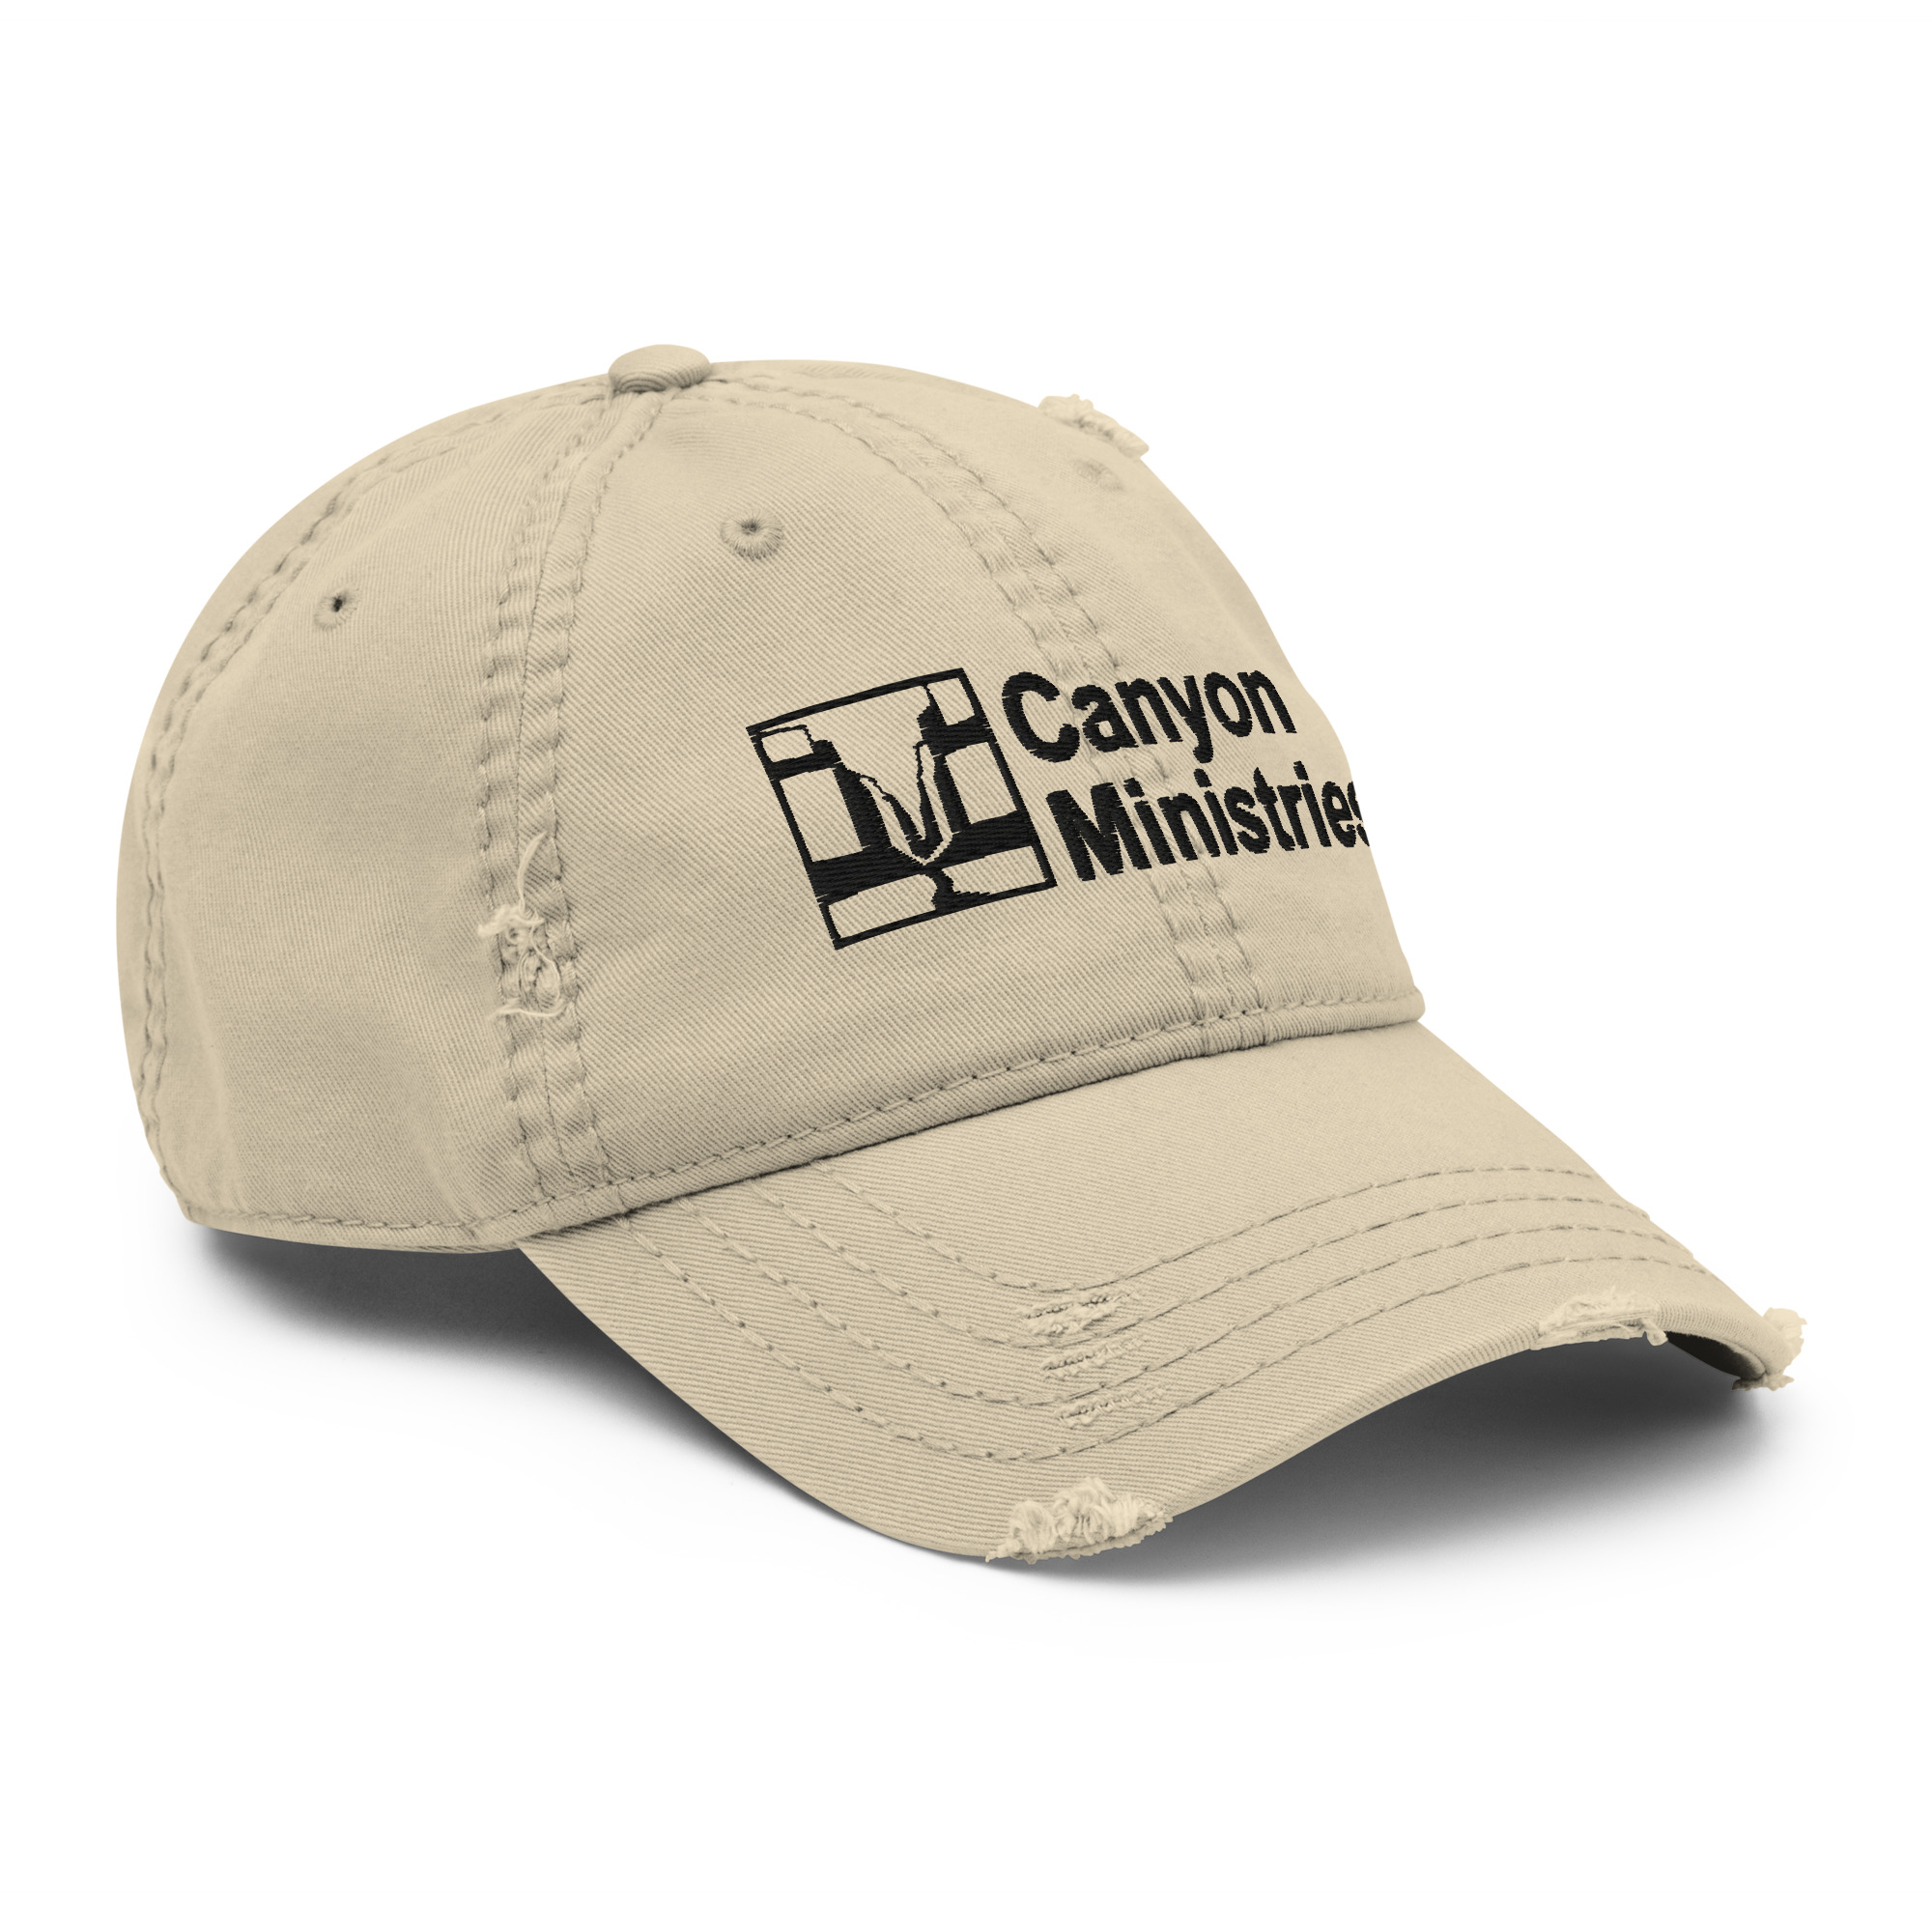 https://www.canyonministries.org/wp-content/uploads/2023/01/distressed-dad-hat-khaki-right-front-63cce1e40a9a6.jpg